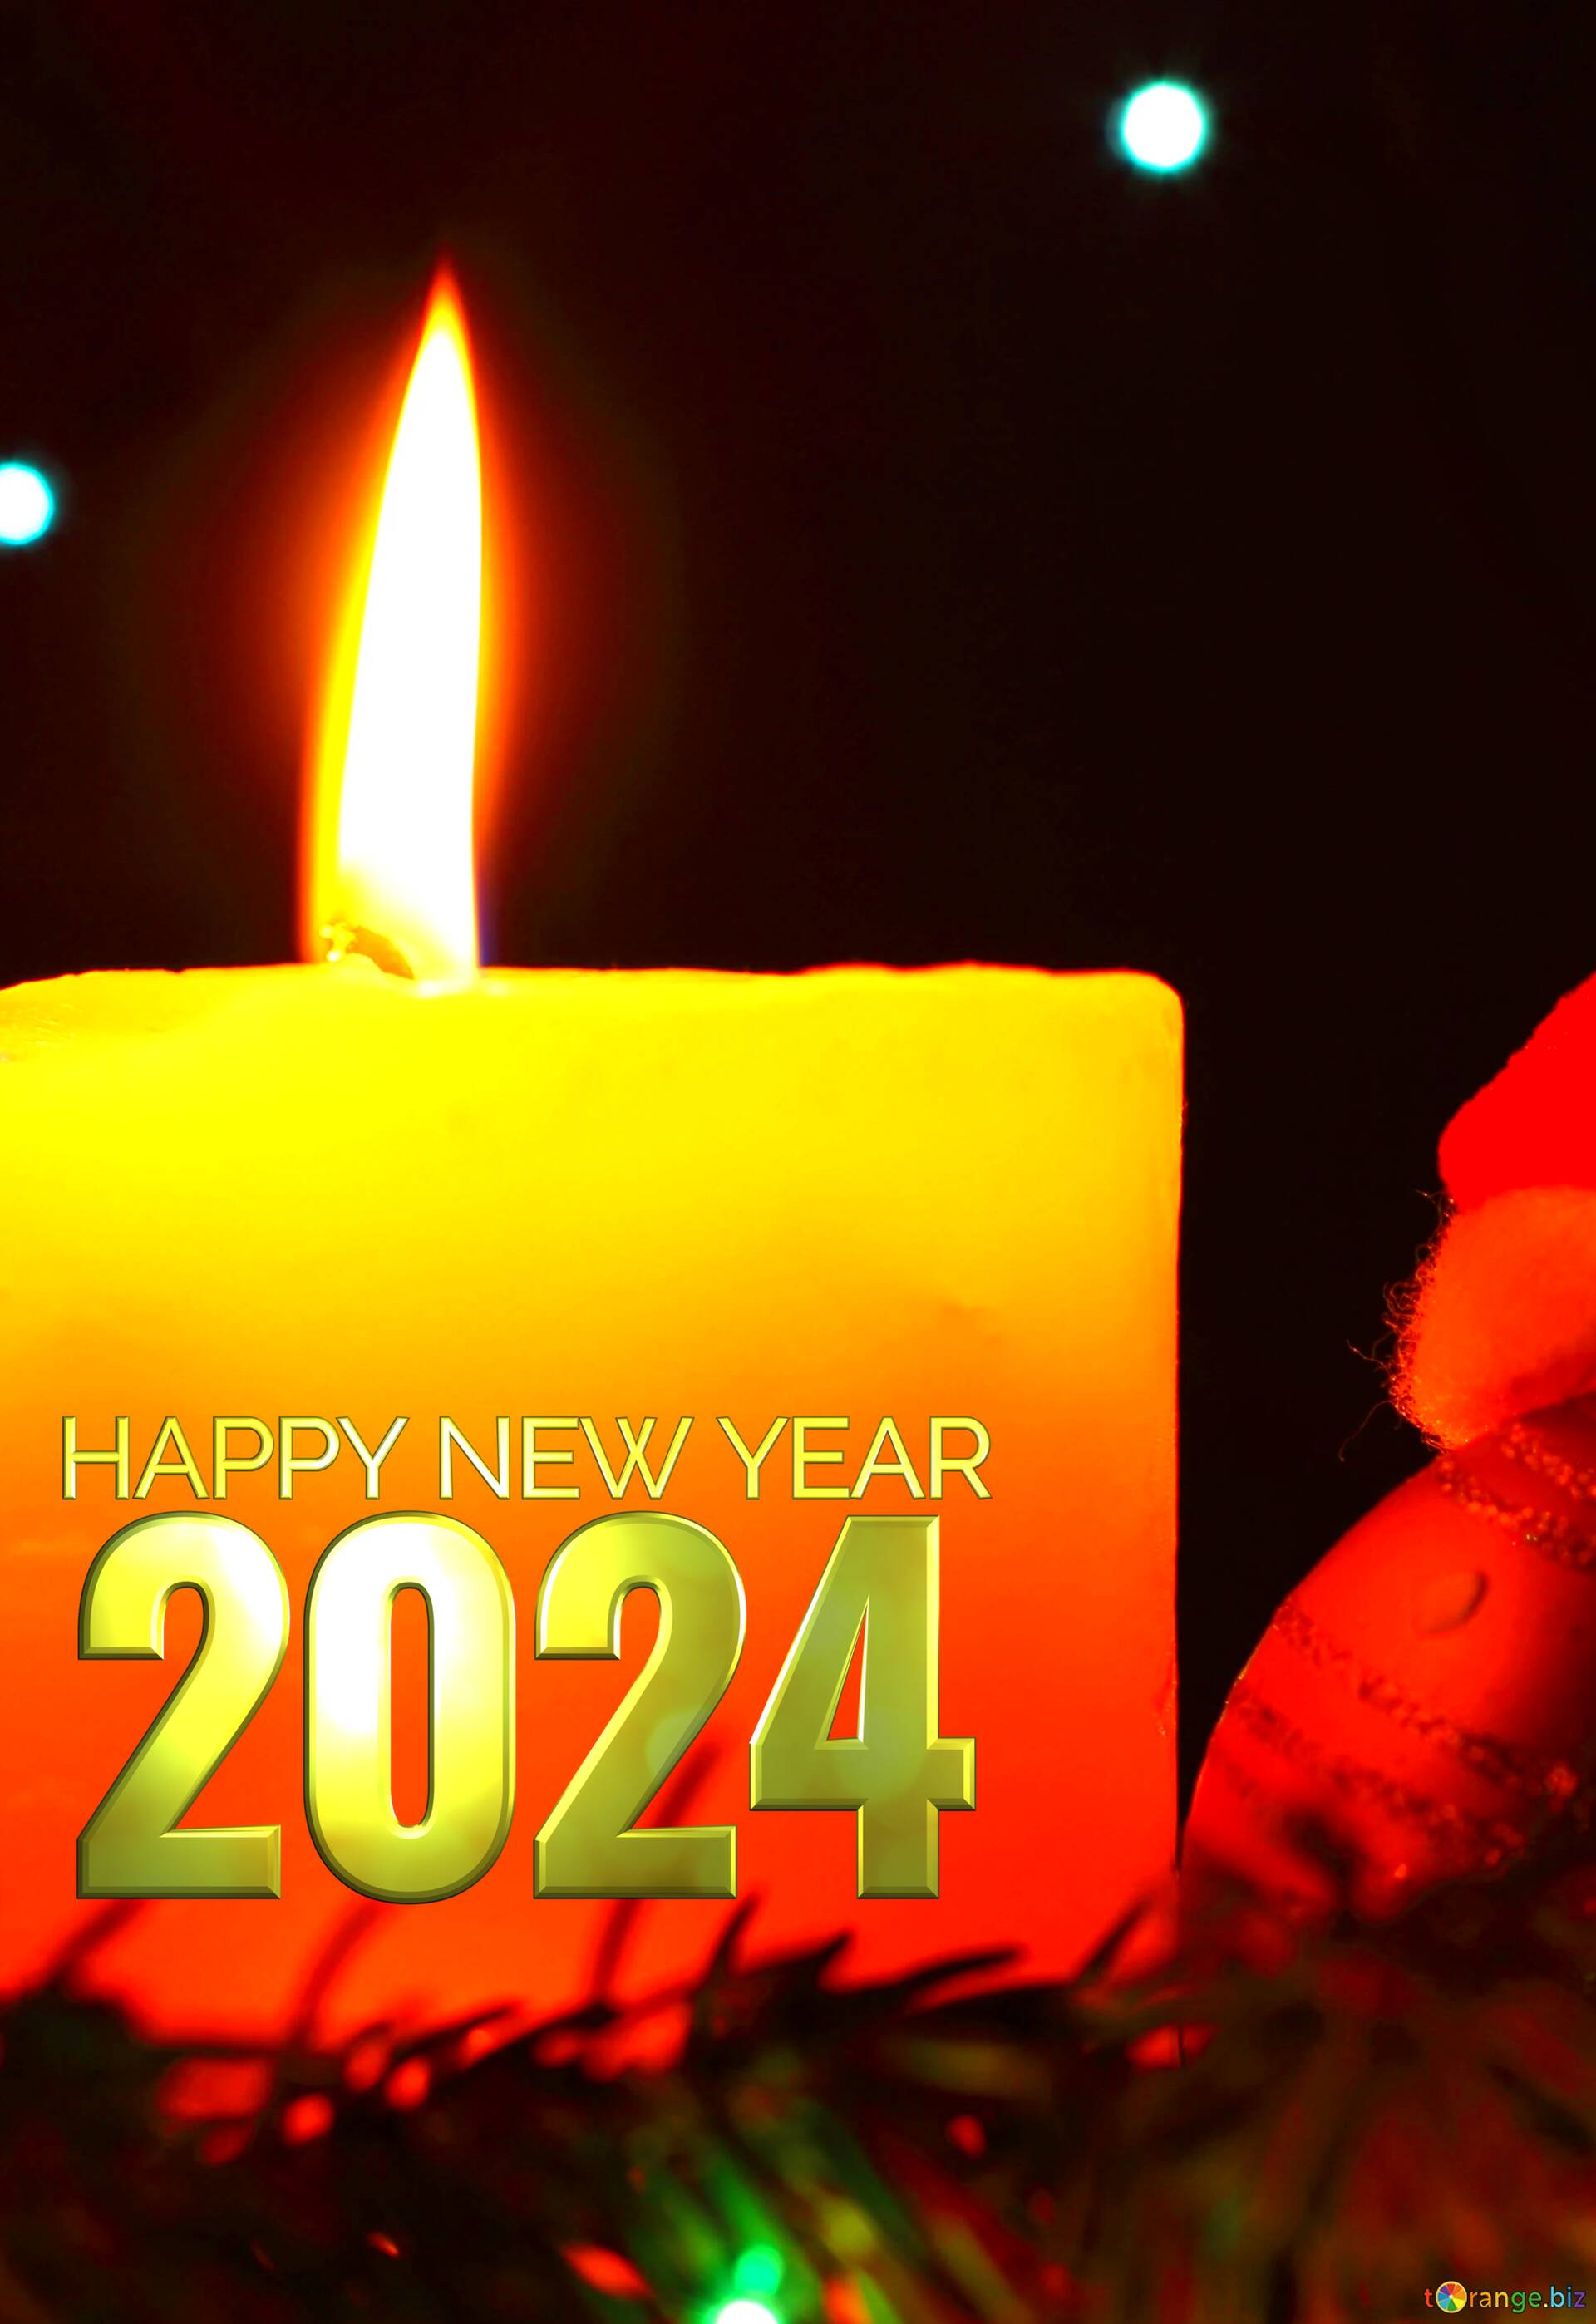 Download Free Picture Happy New Year 2024 Candle On Cc-By License ~ Free  Image Stock Torange.biz ~ Fx №13675